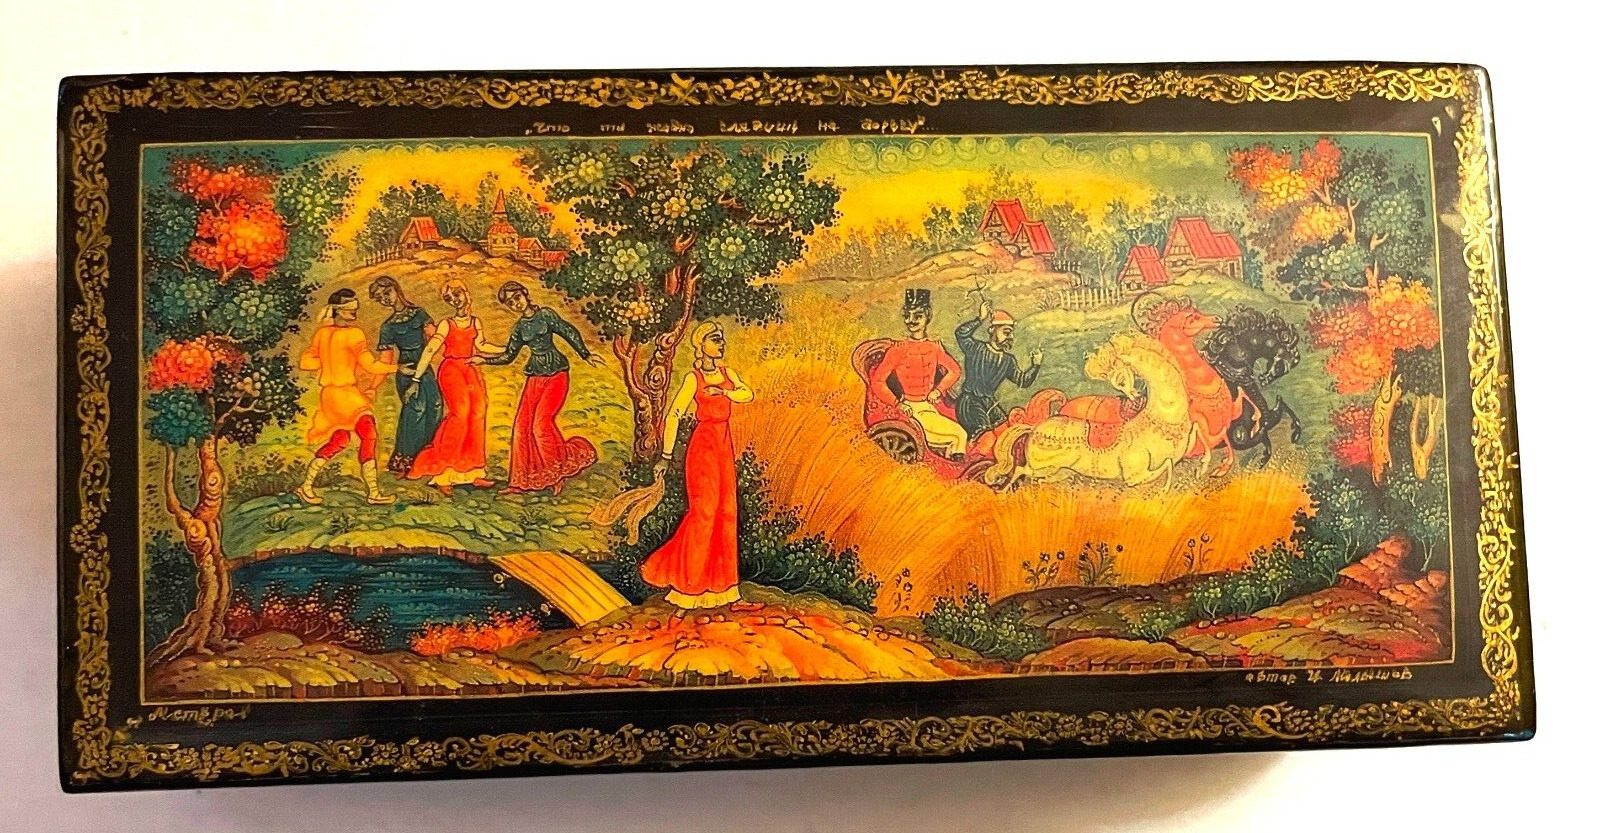 Vintage Russian Lacquer Box Mstera Playful Scene